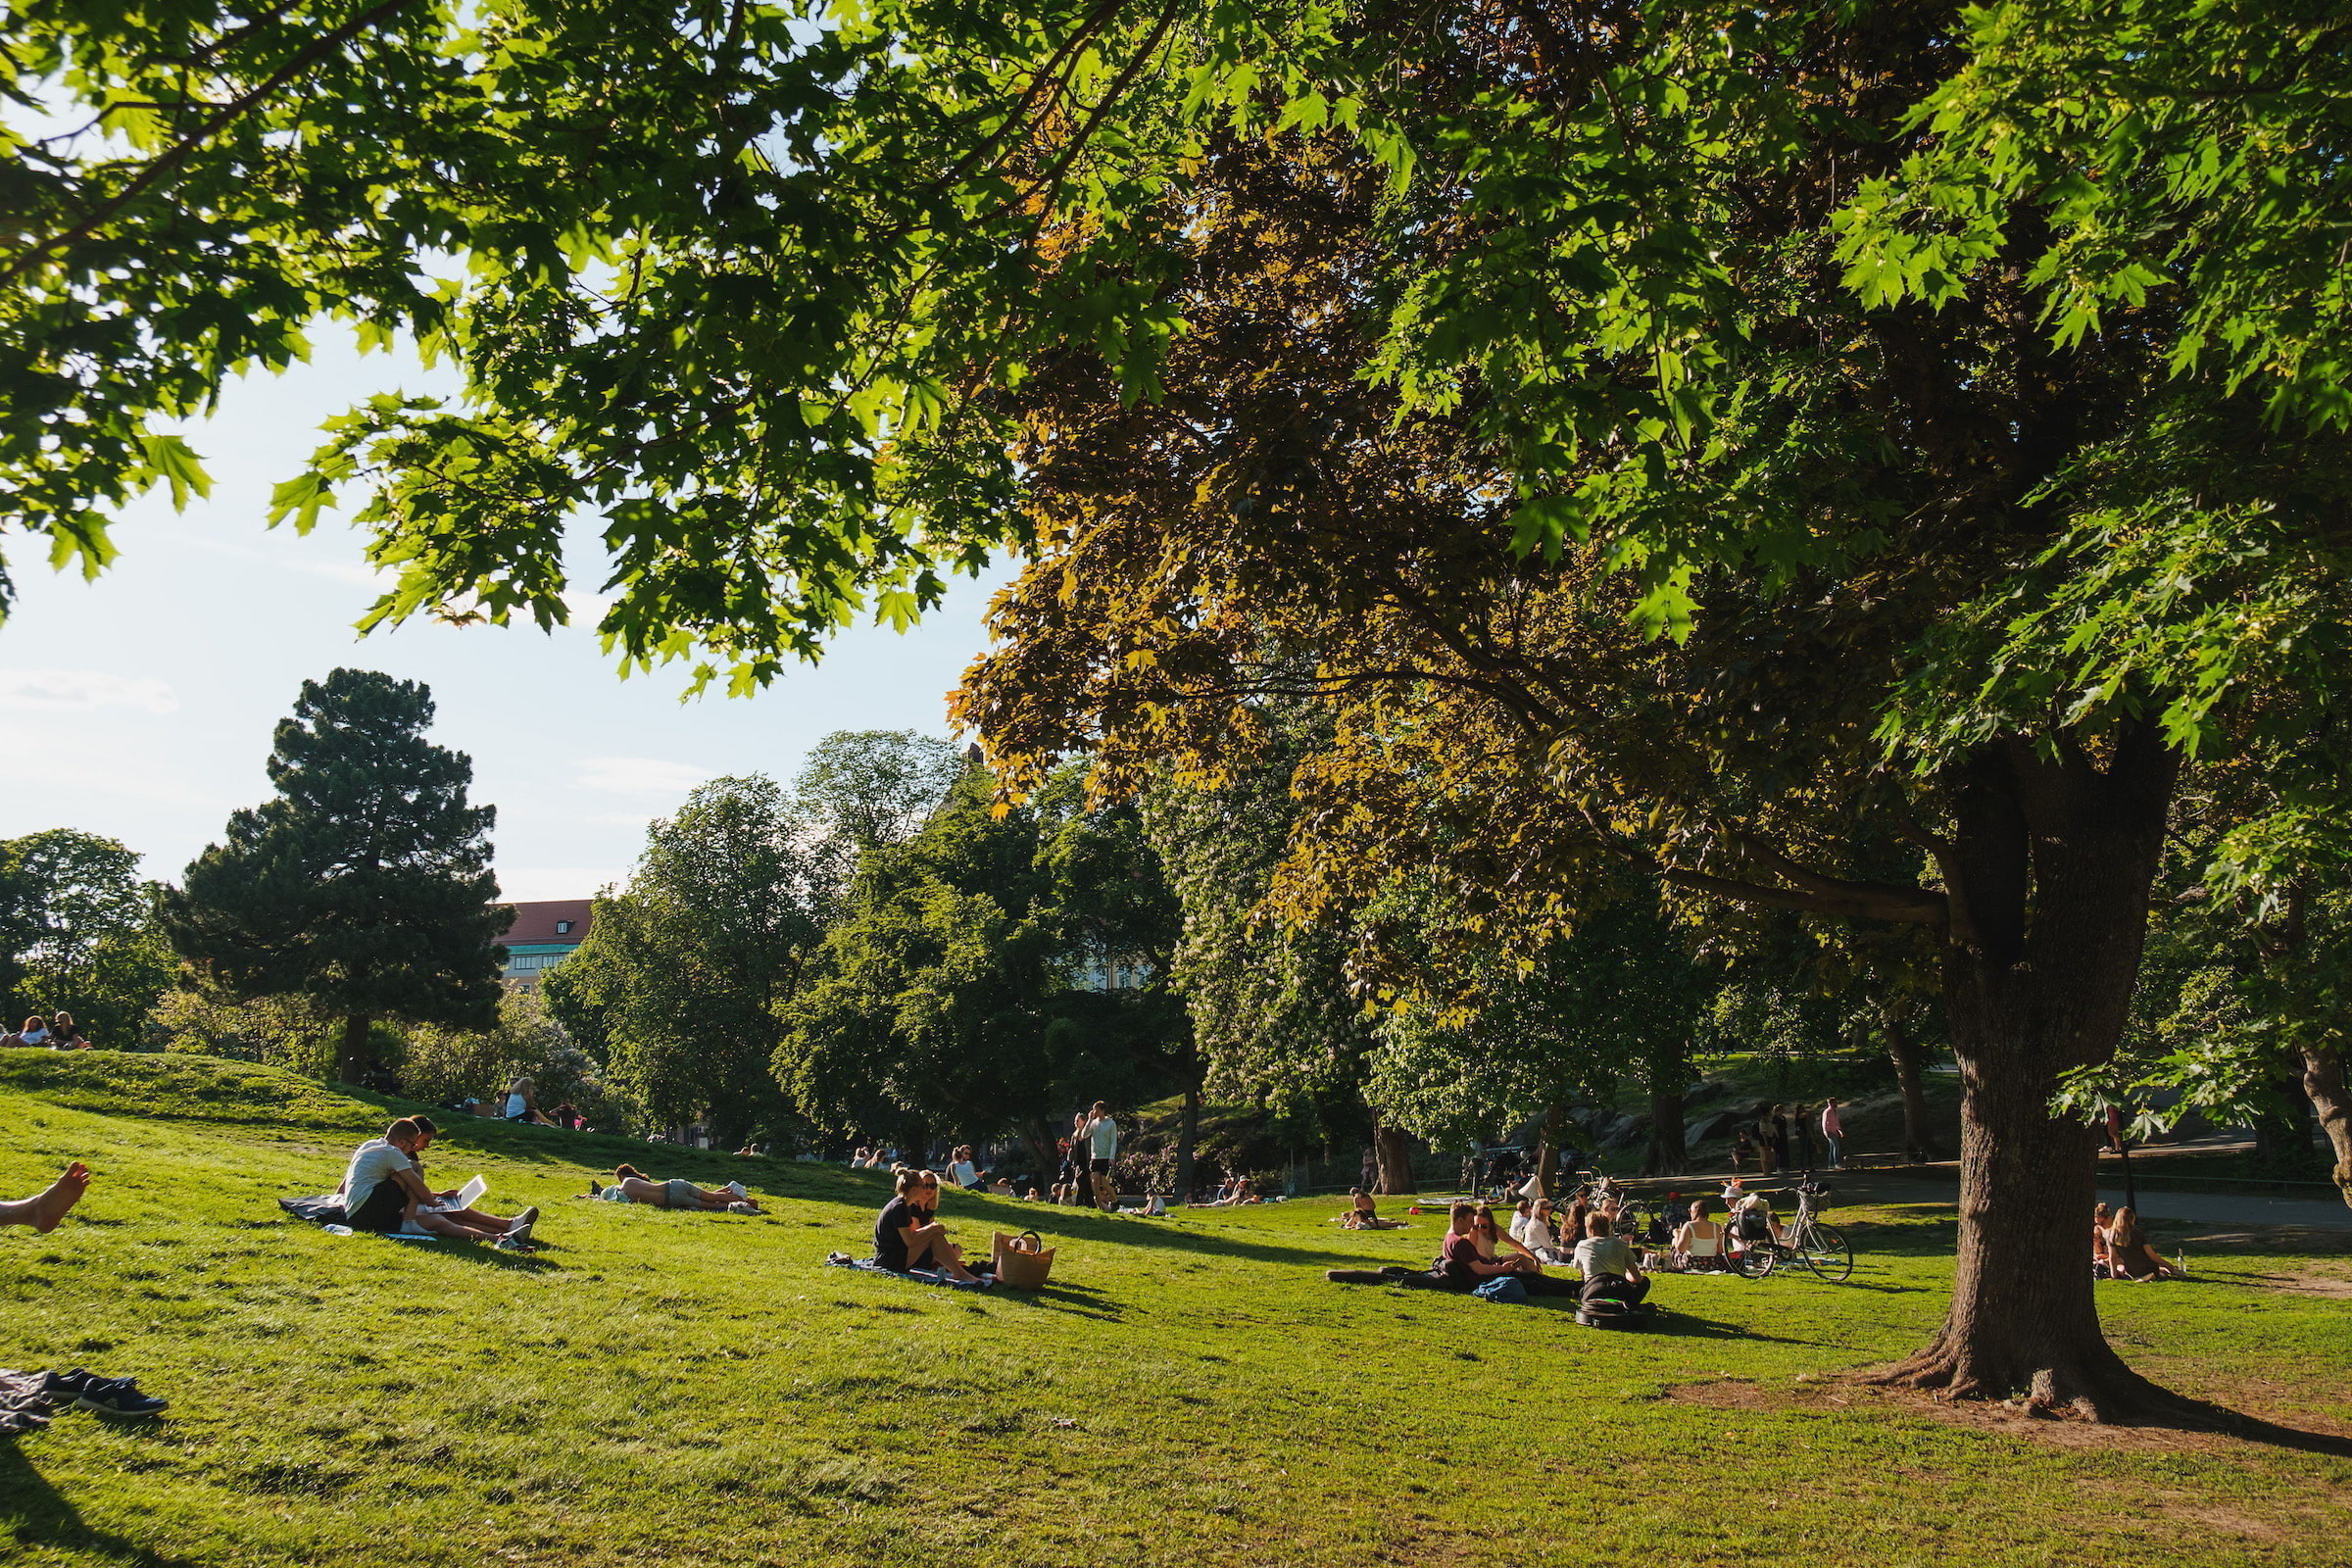 People sitting on the grass in a park